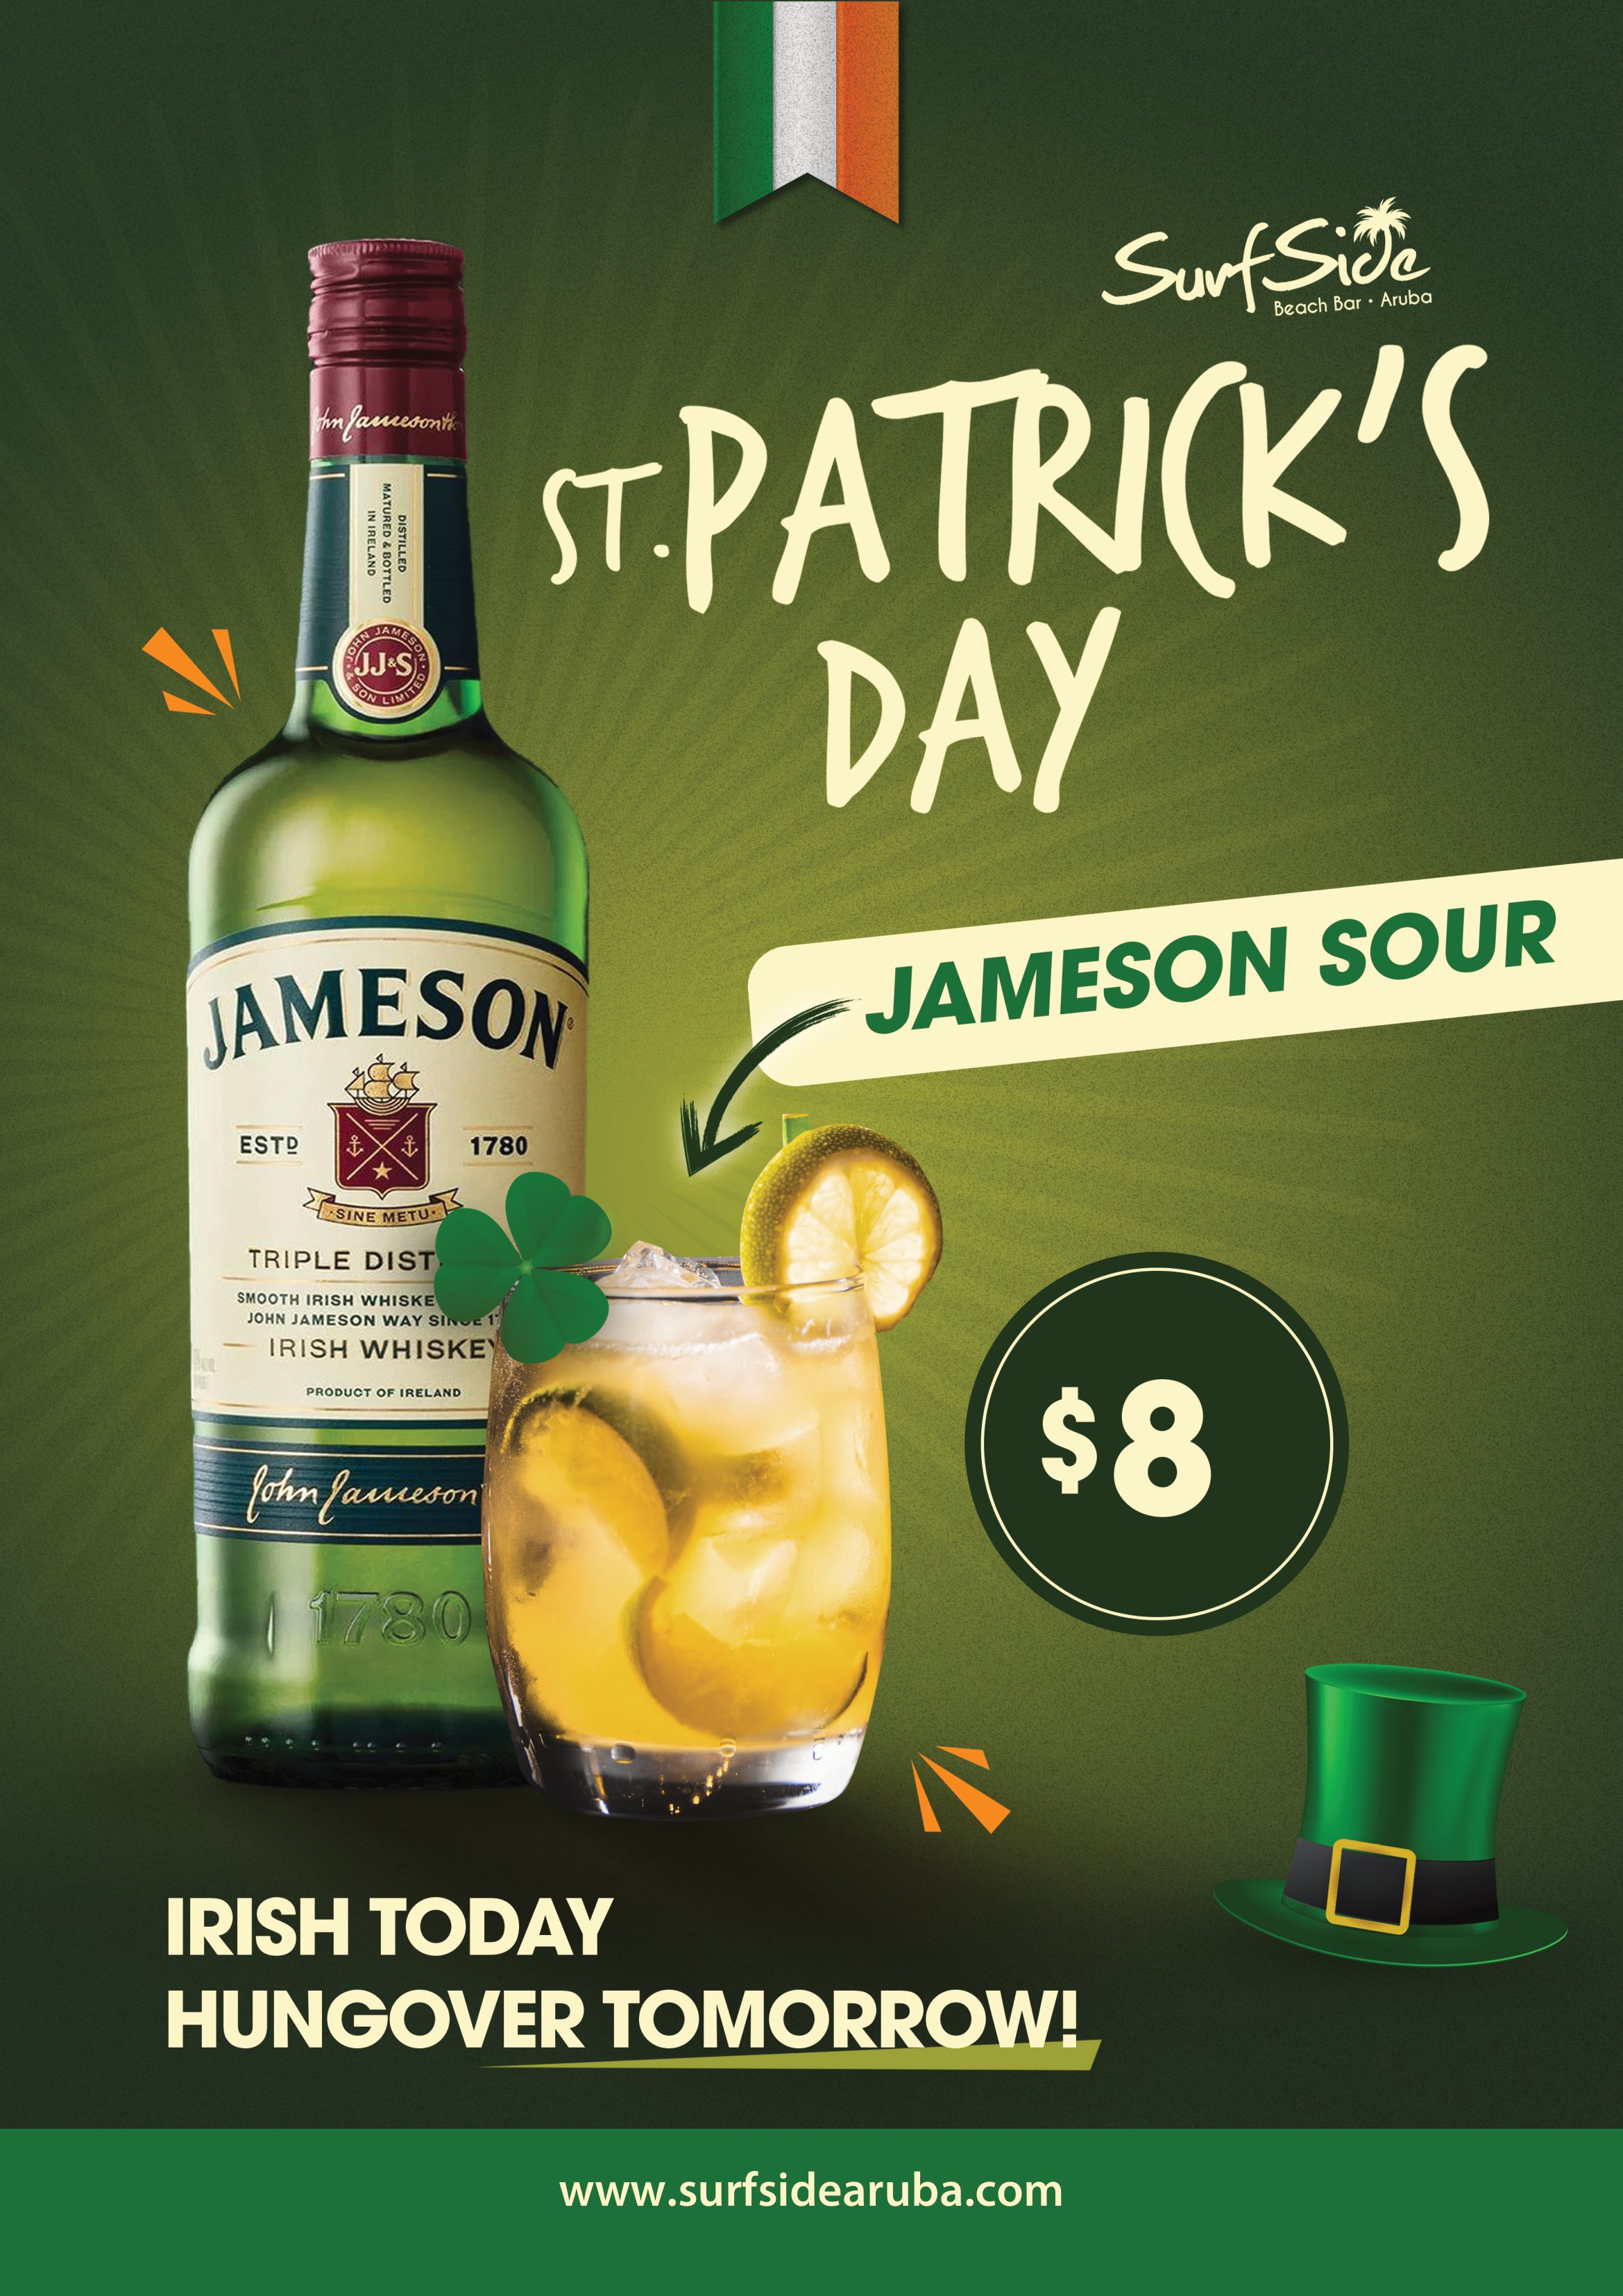 Get Lucky this St. Patrick's Day at Surfside Beach Bar with the Jameson Sour cocktail for just $8!